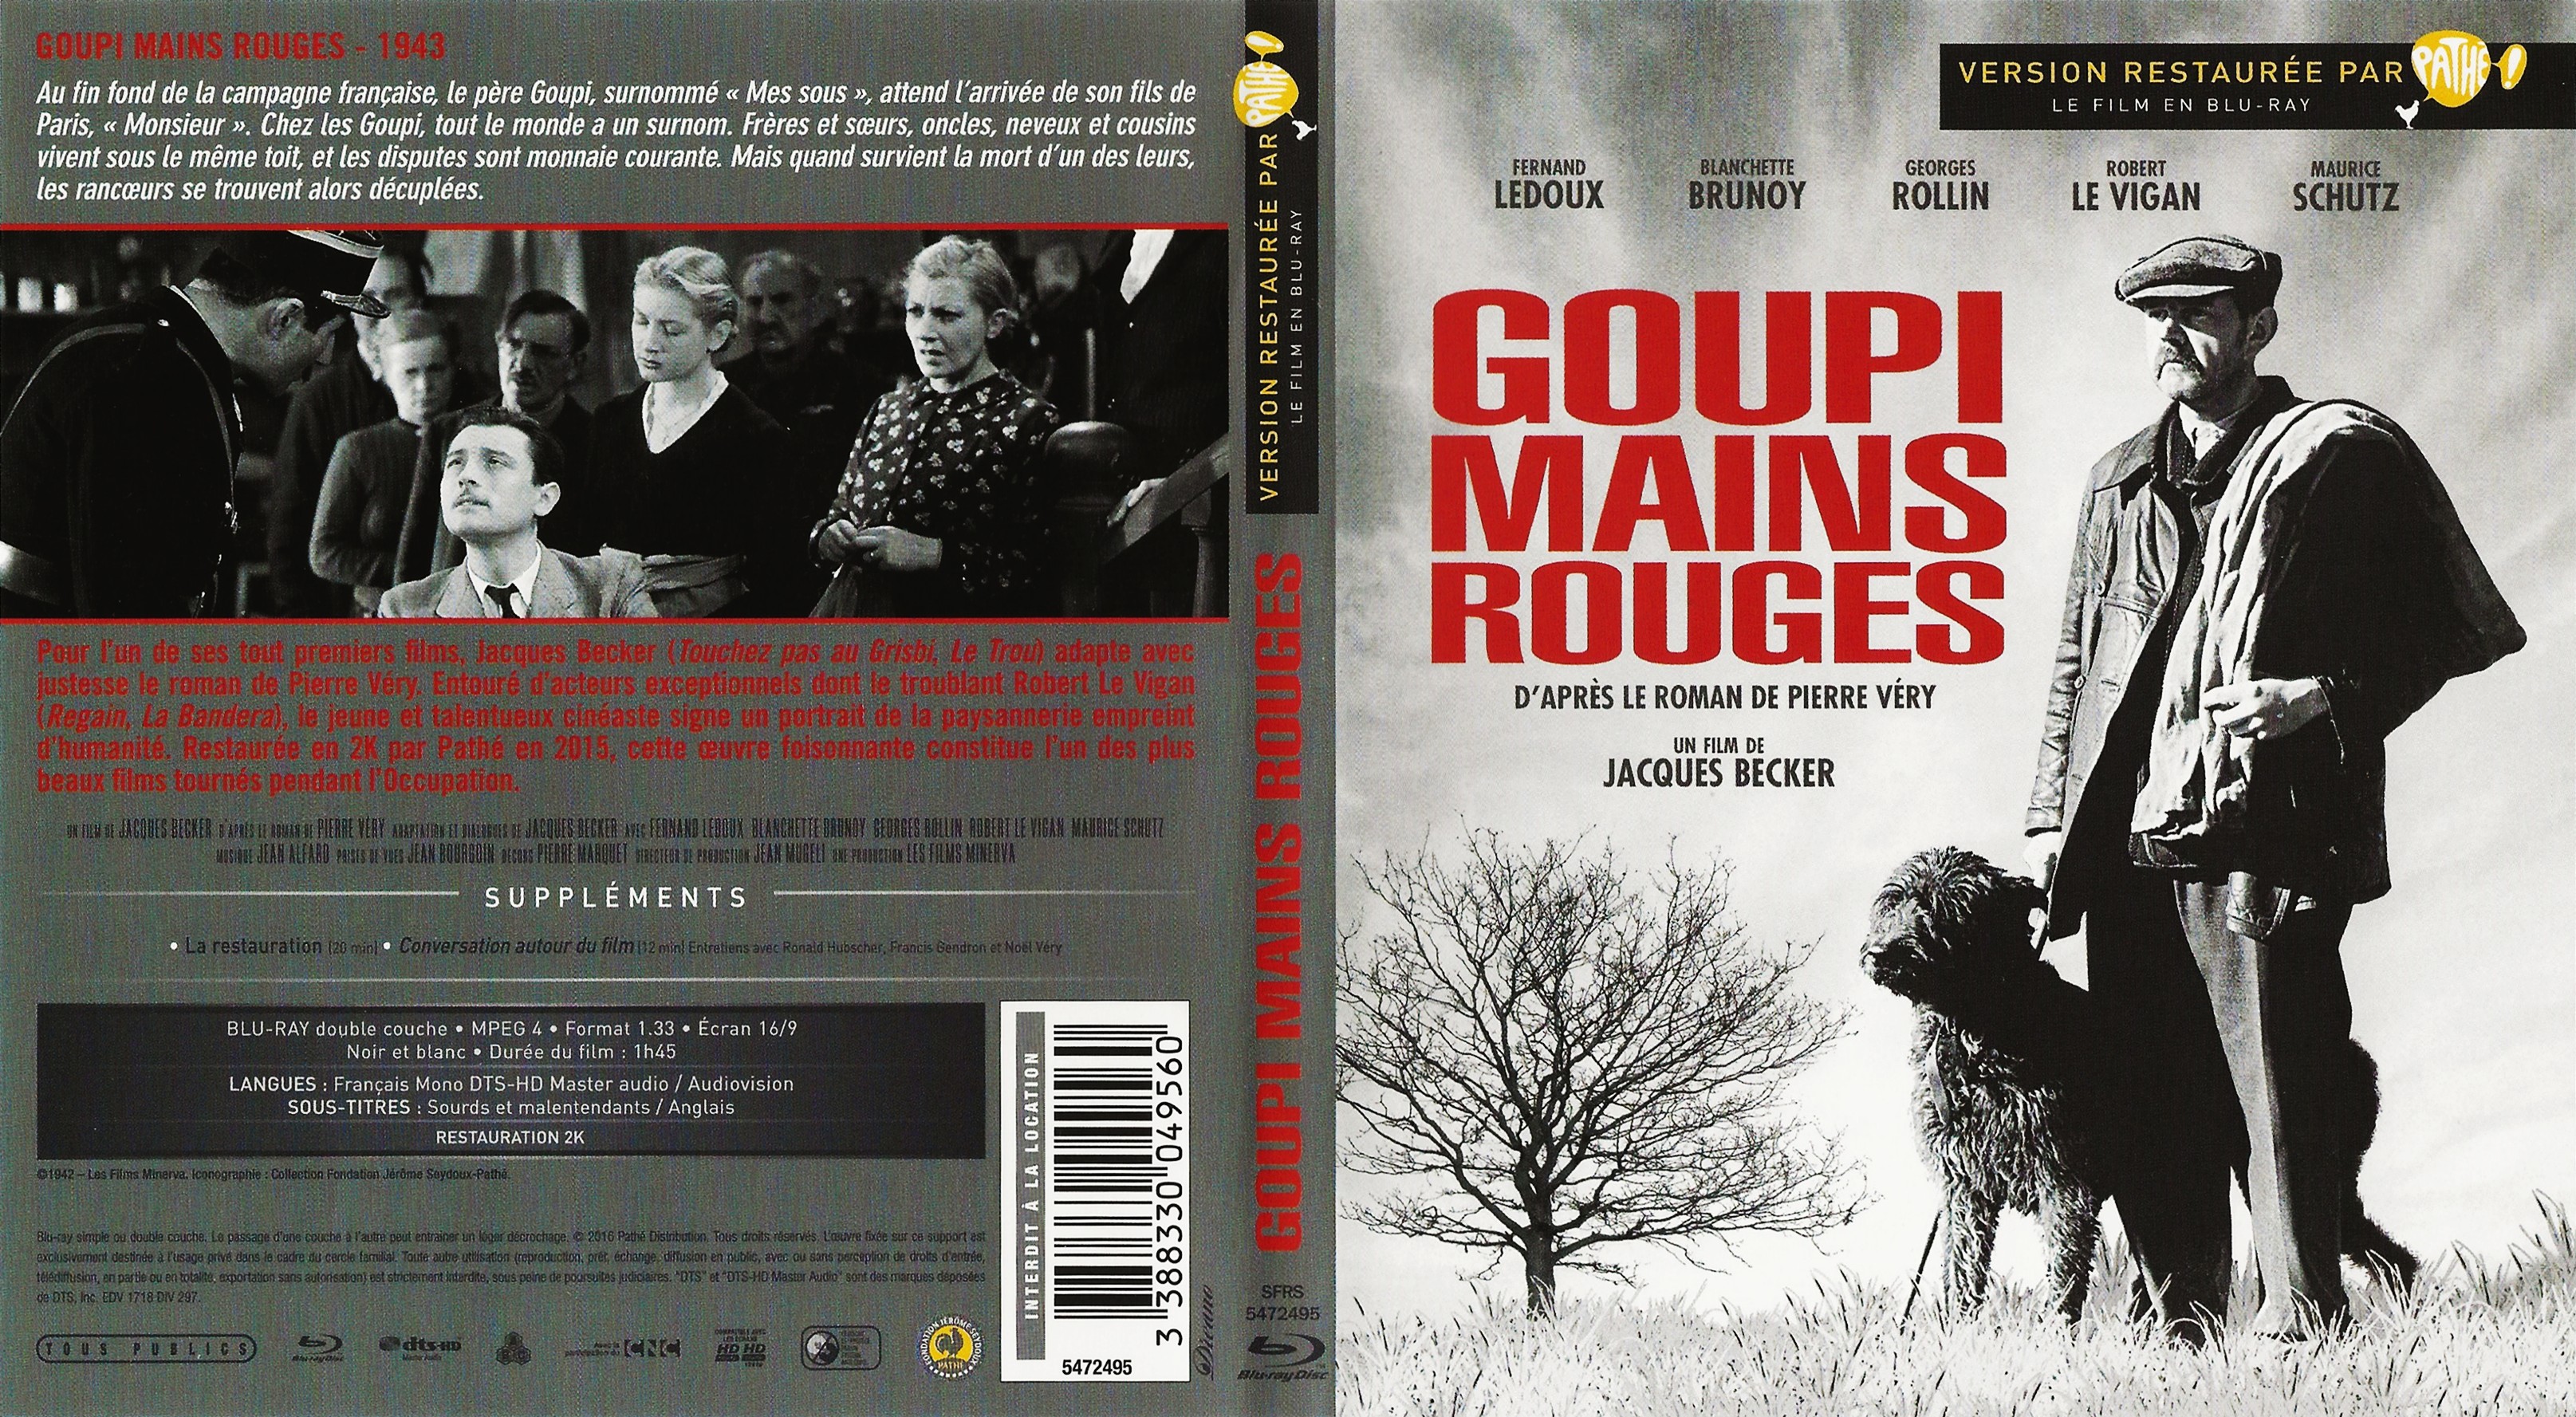 Jaquette DVD Goupi mains rouges (BLU-RAY) v2